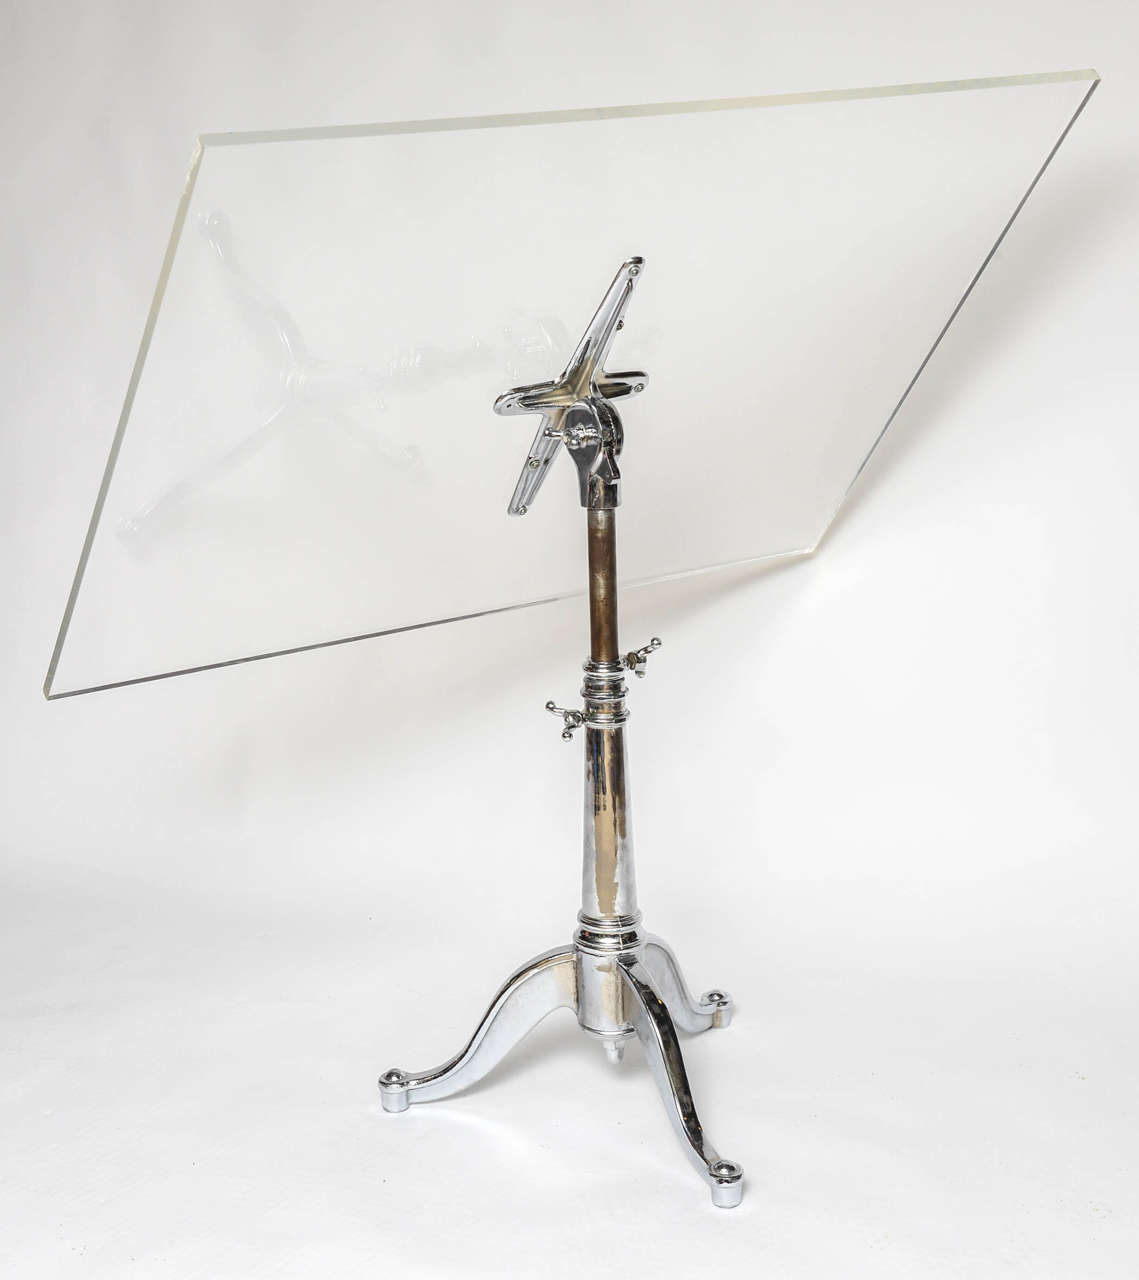 Nickel-plated iron pedestal base, very heavy yet decorative and Minimalist. This 1900s drafting table can be used as an easel or photography display.
Easy to articulate to any angle position (including a flat tabletop) very practical and modern.